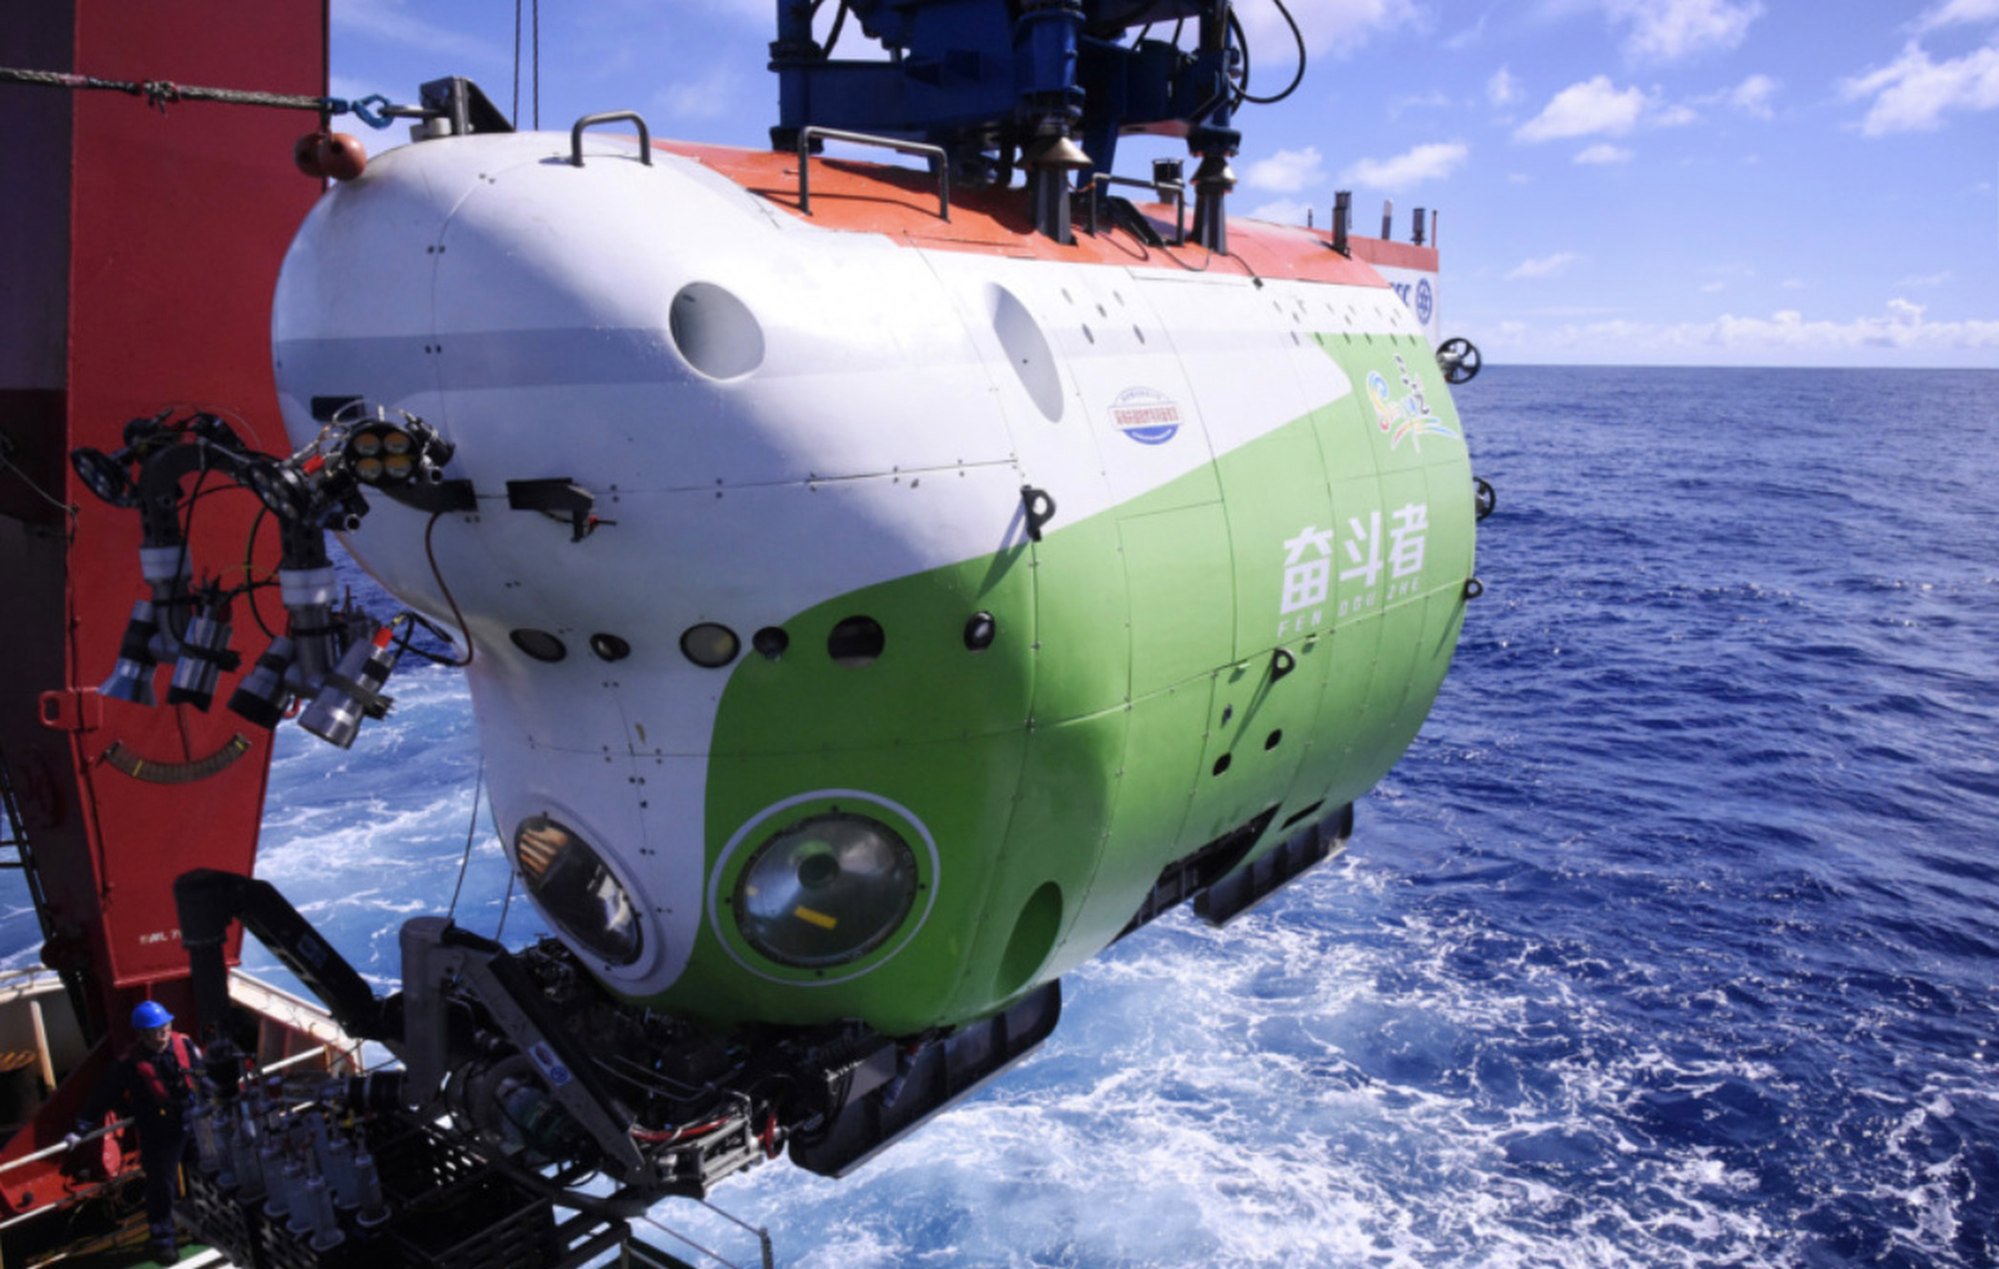 The Fendouzhe, or Striver, is a deep-sea, three-person submersible that took Chinese and New Zealand researchers into the Kermadec Trench. Photo: NIWA